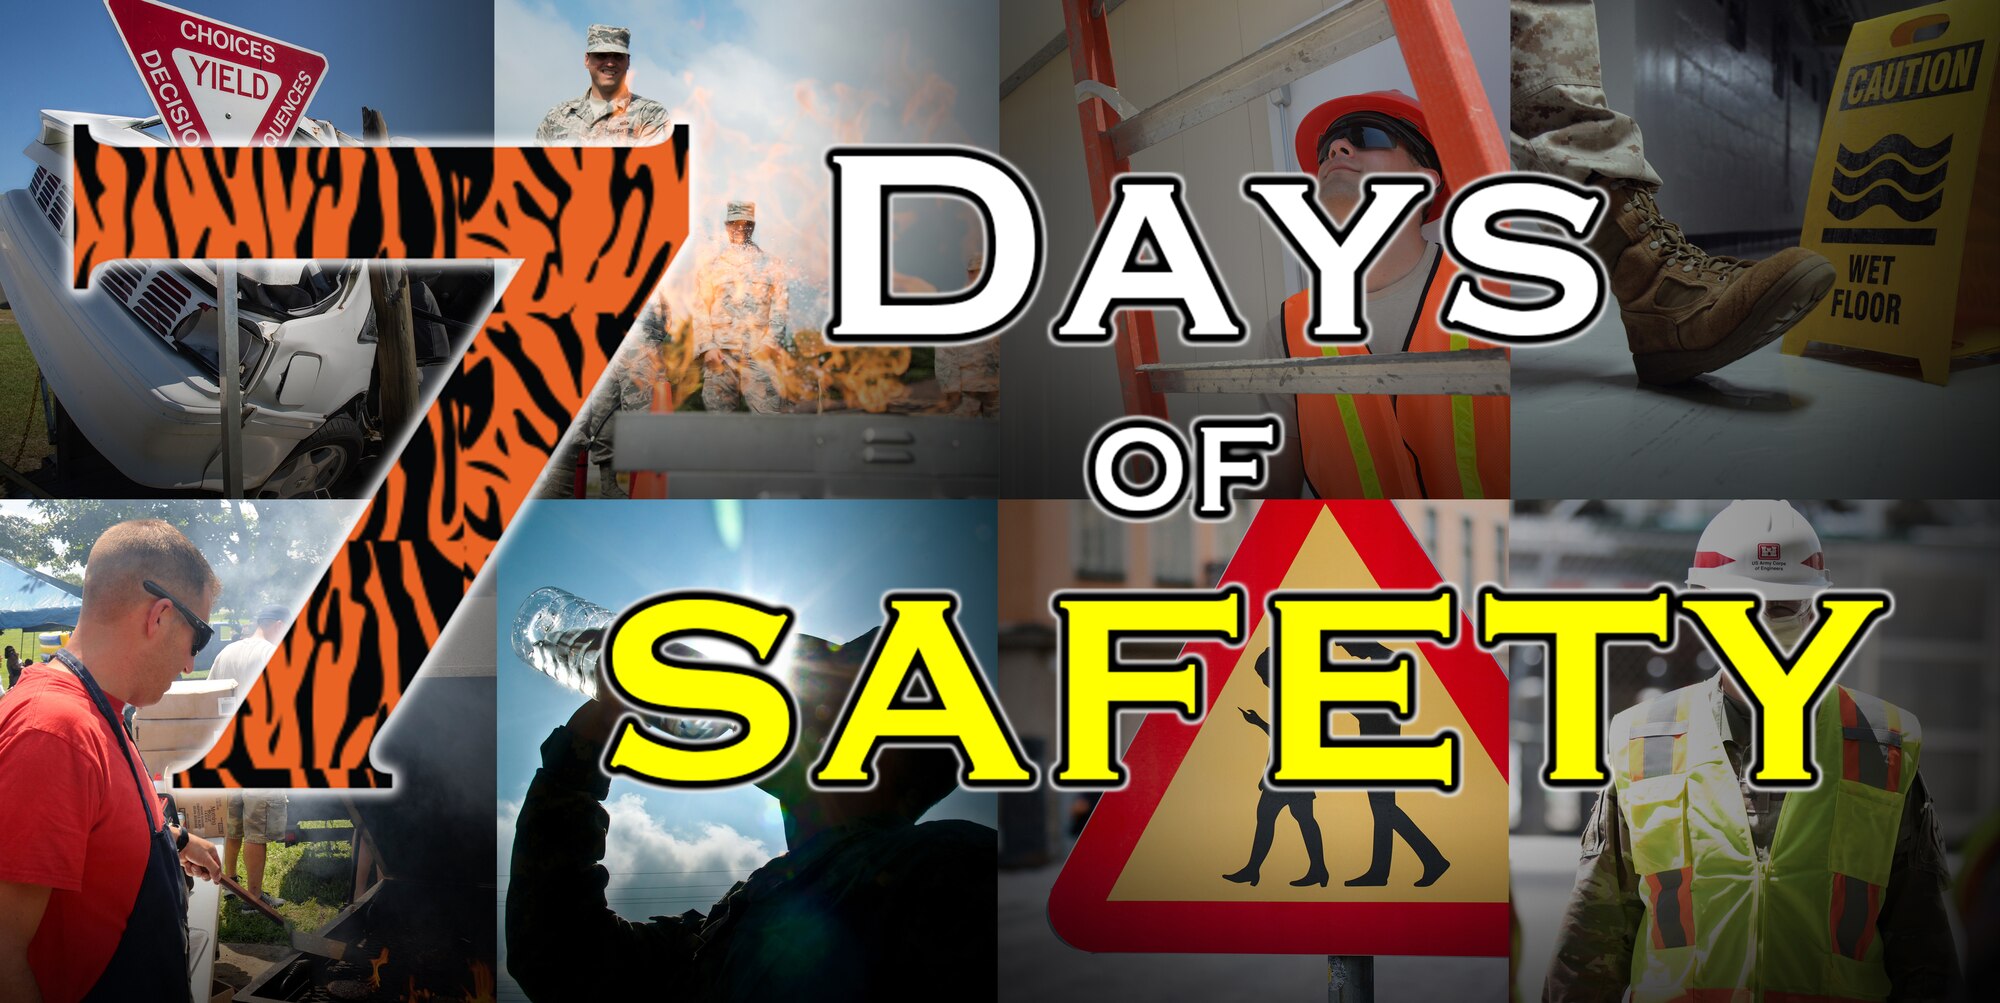 7 Days of Safety collage